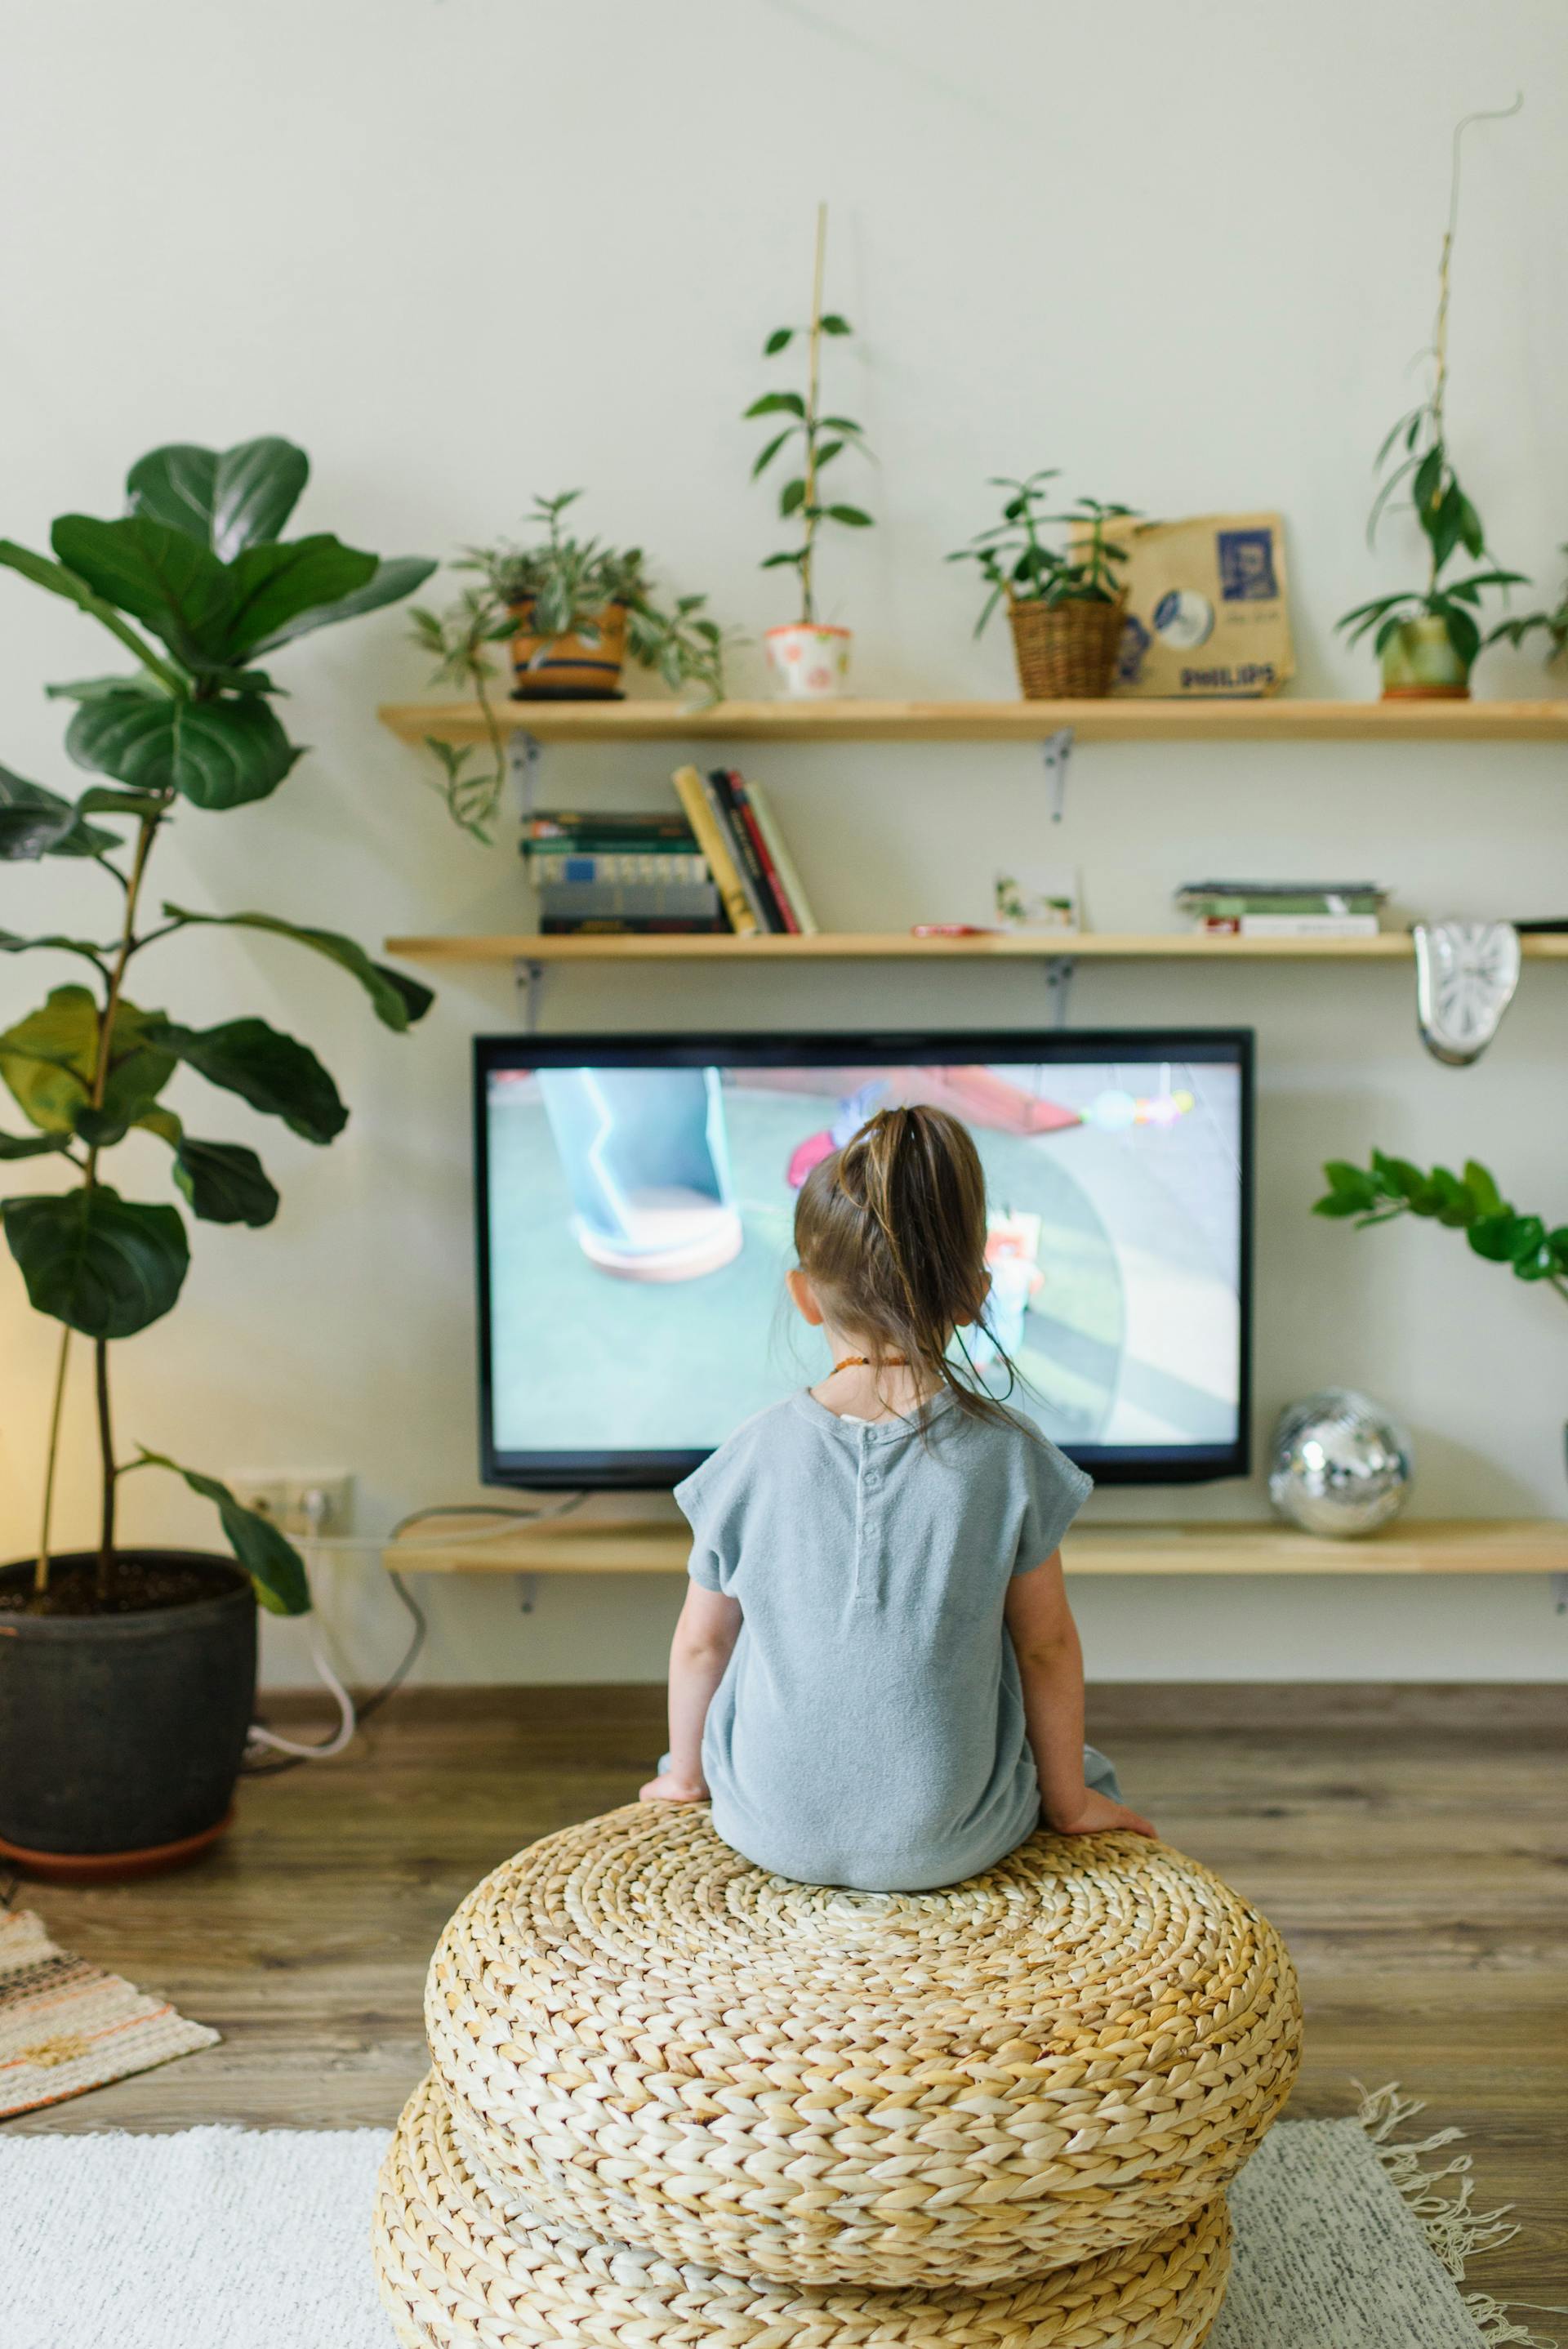 A child watching TV | Source: Pexels